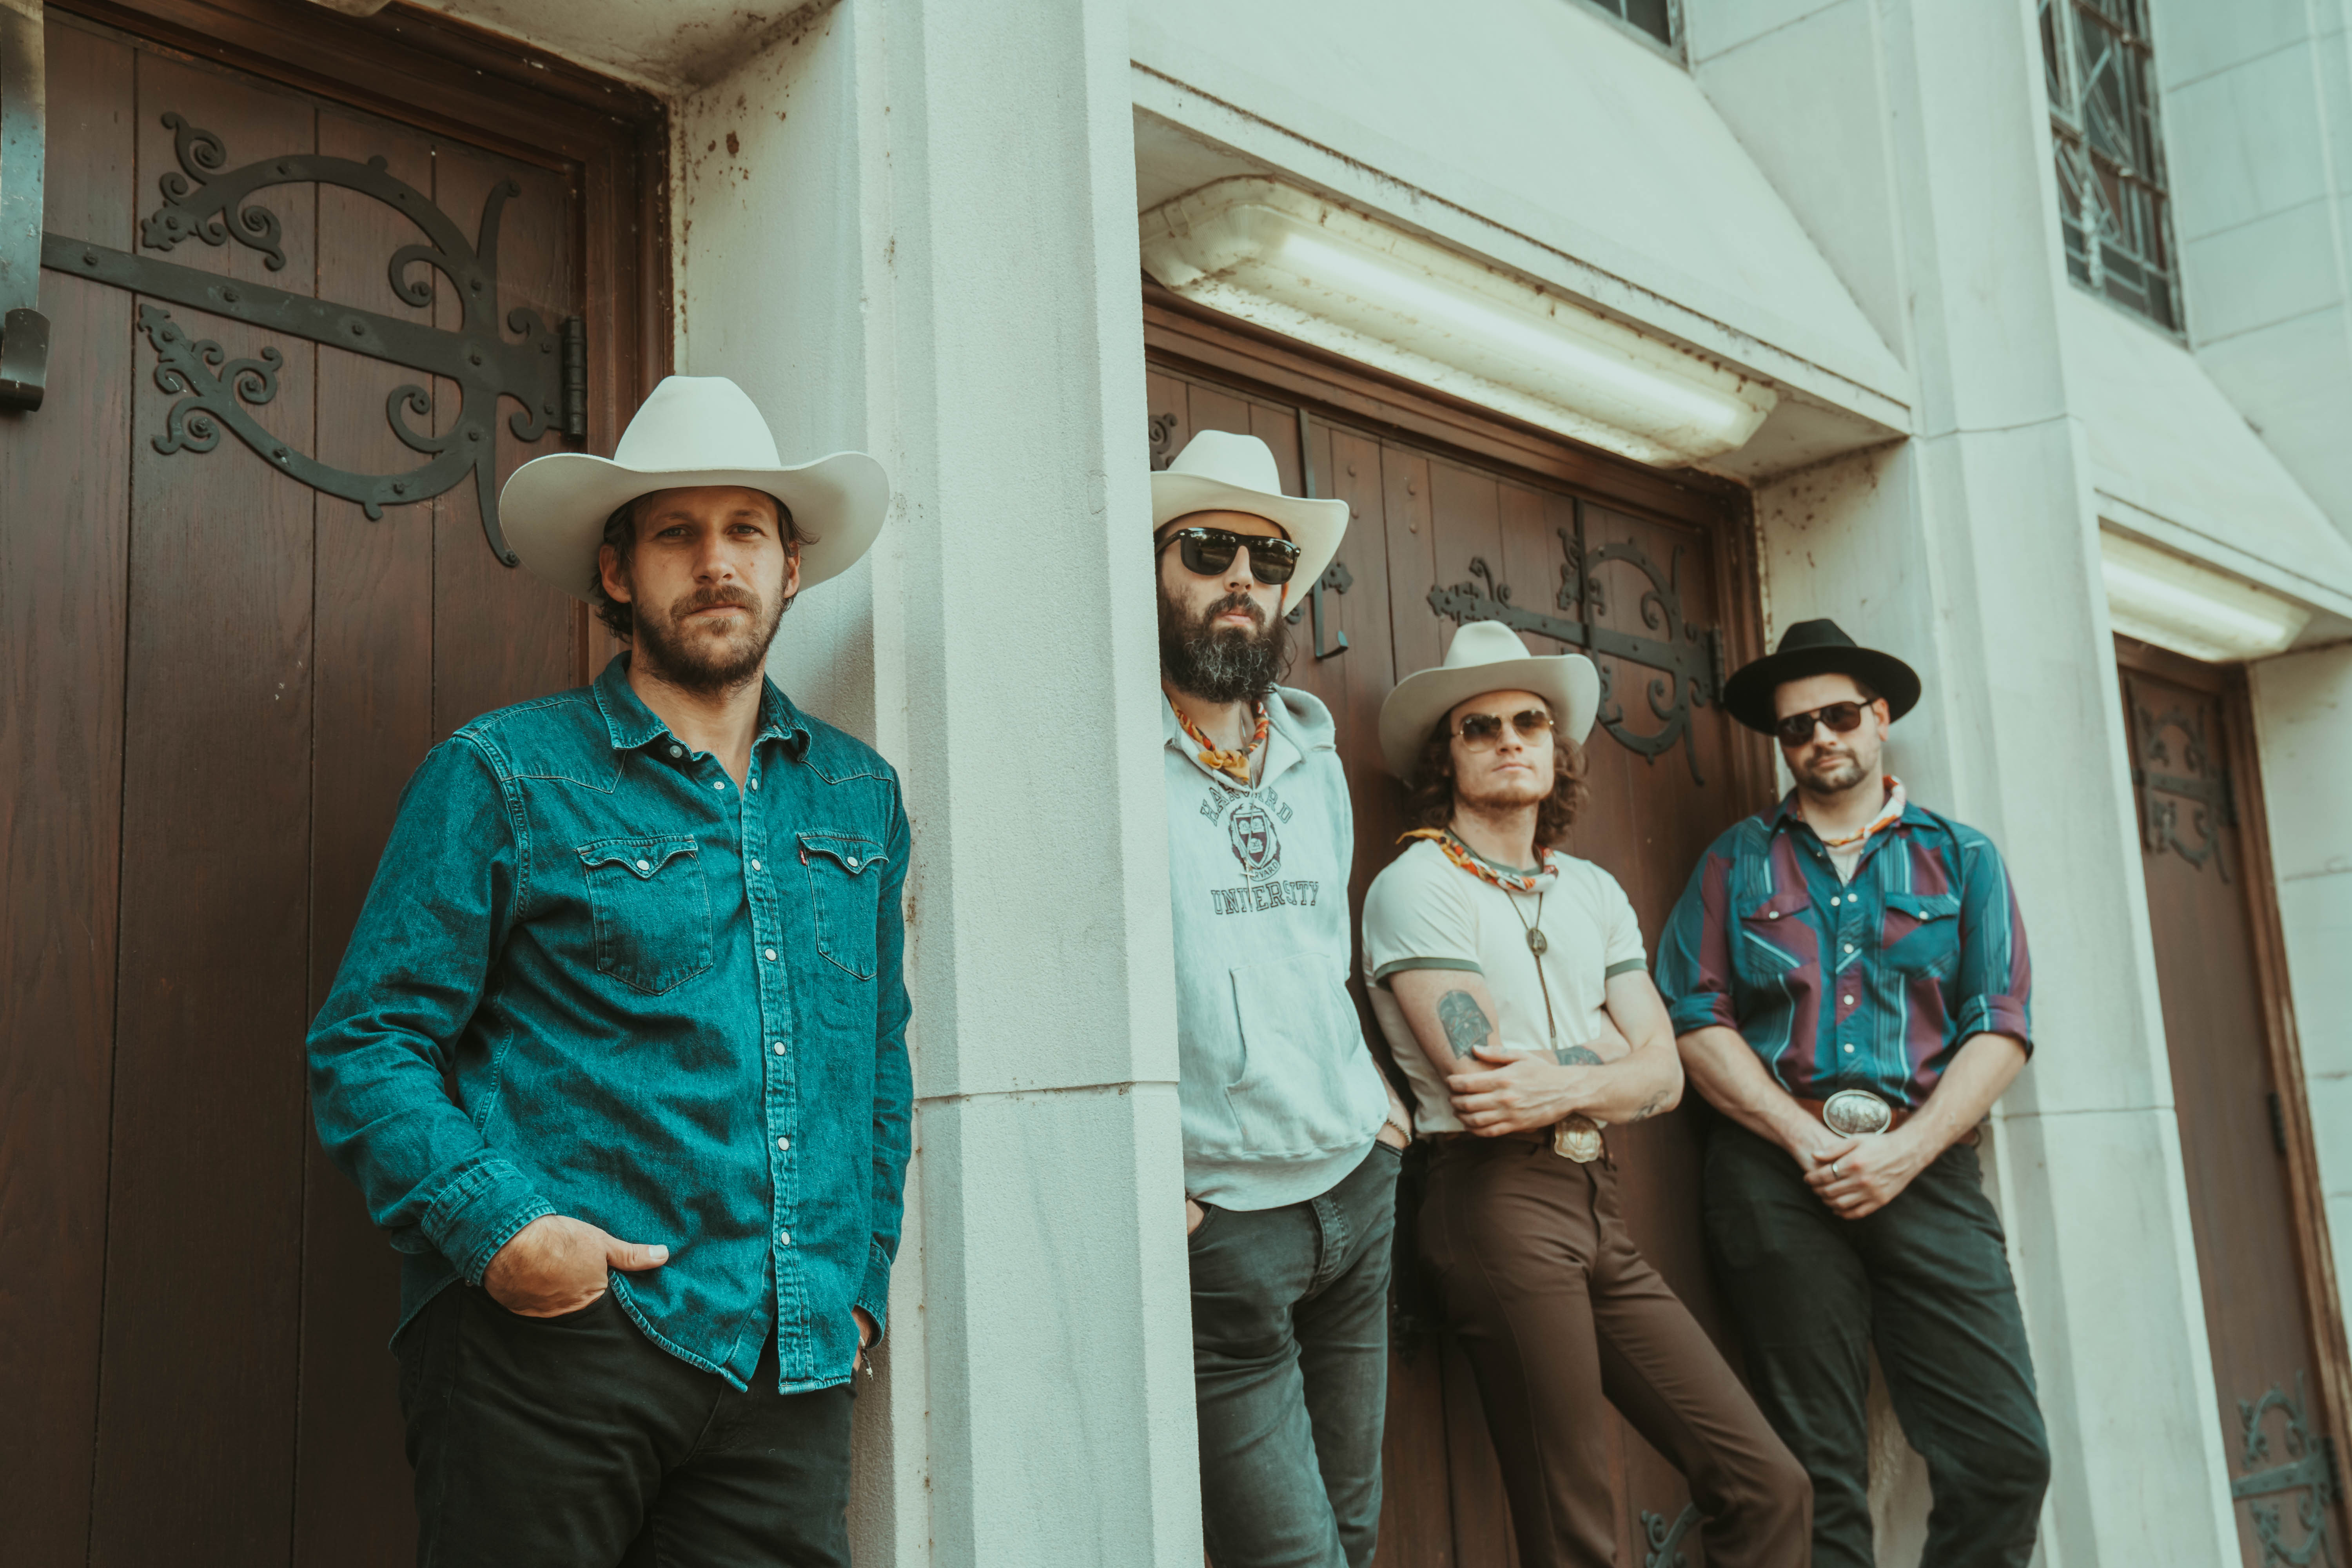 Nate Fredrick & The Wholesome Boys Find There’s No “Shortcut to Waco”